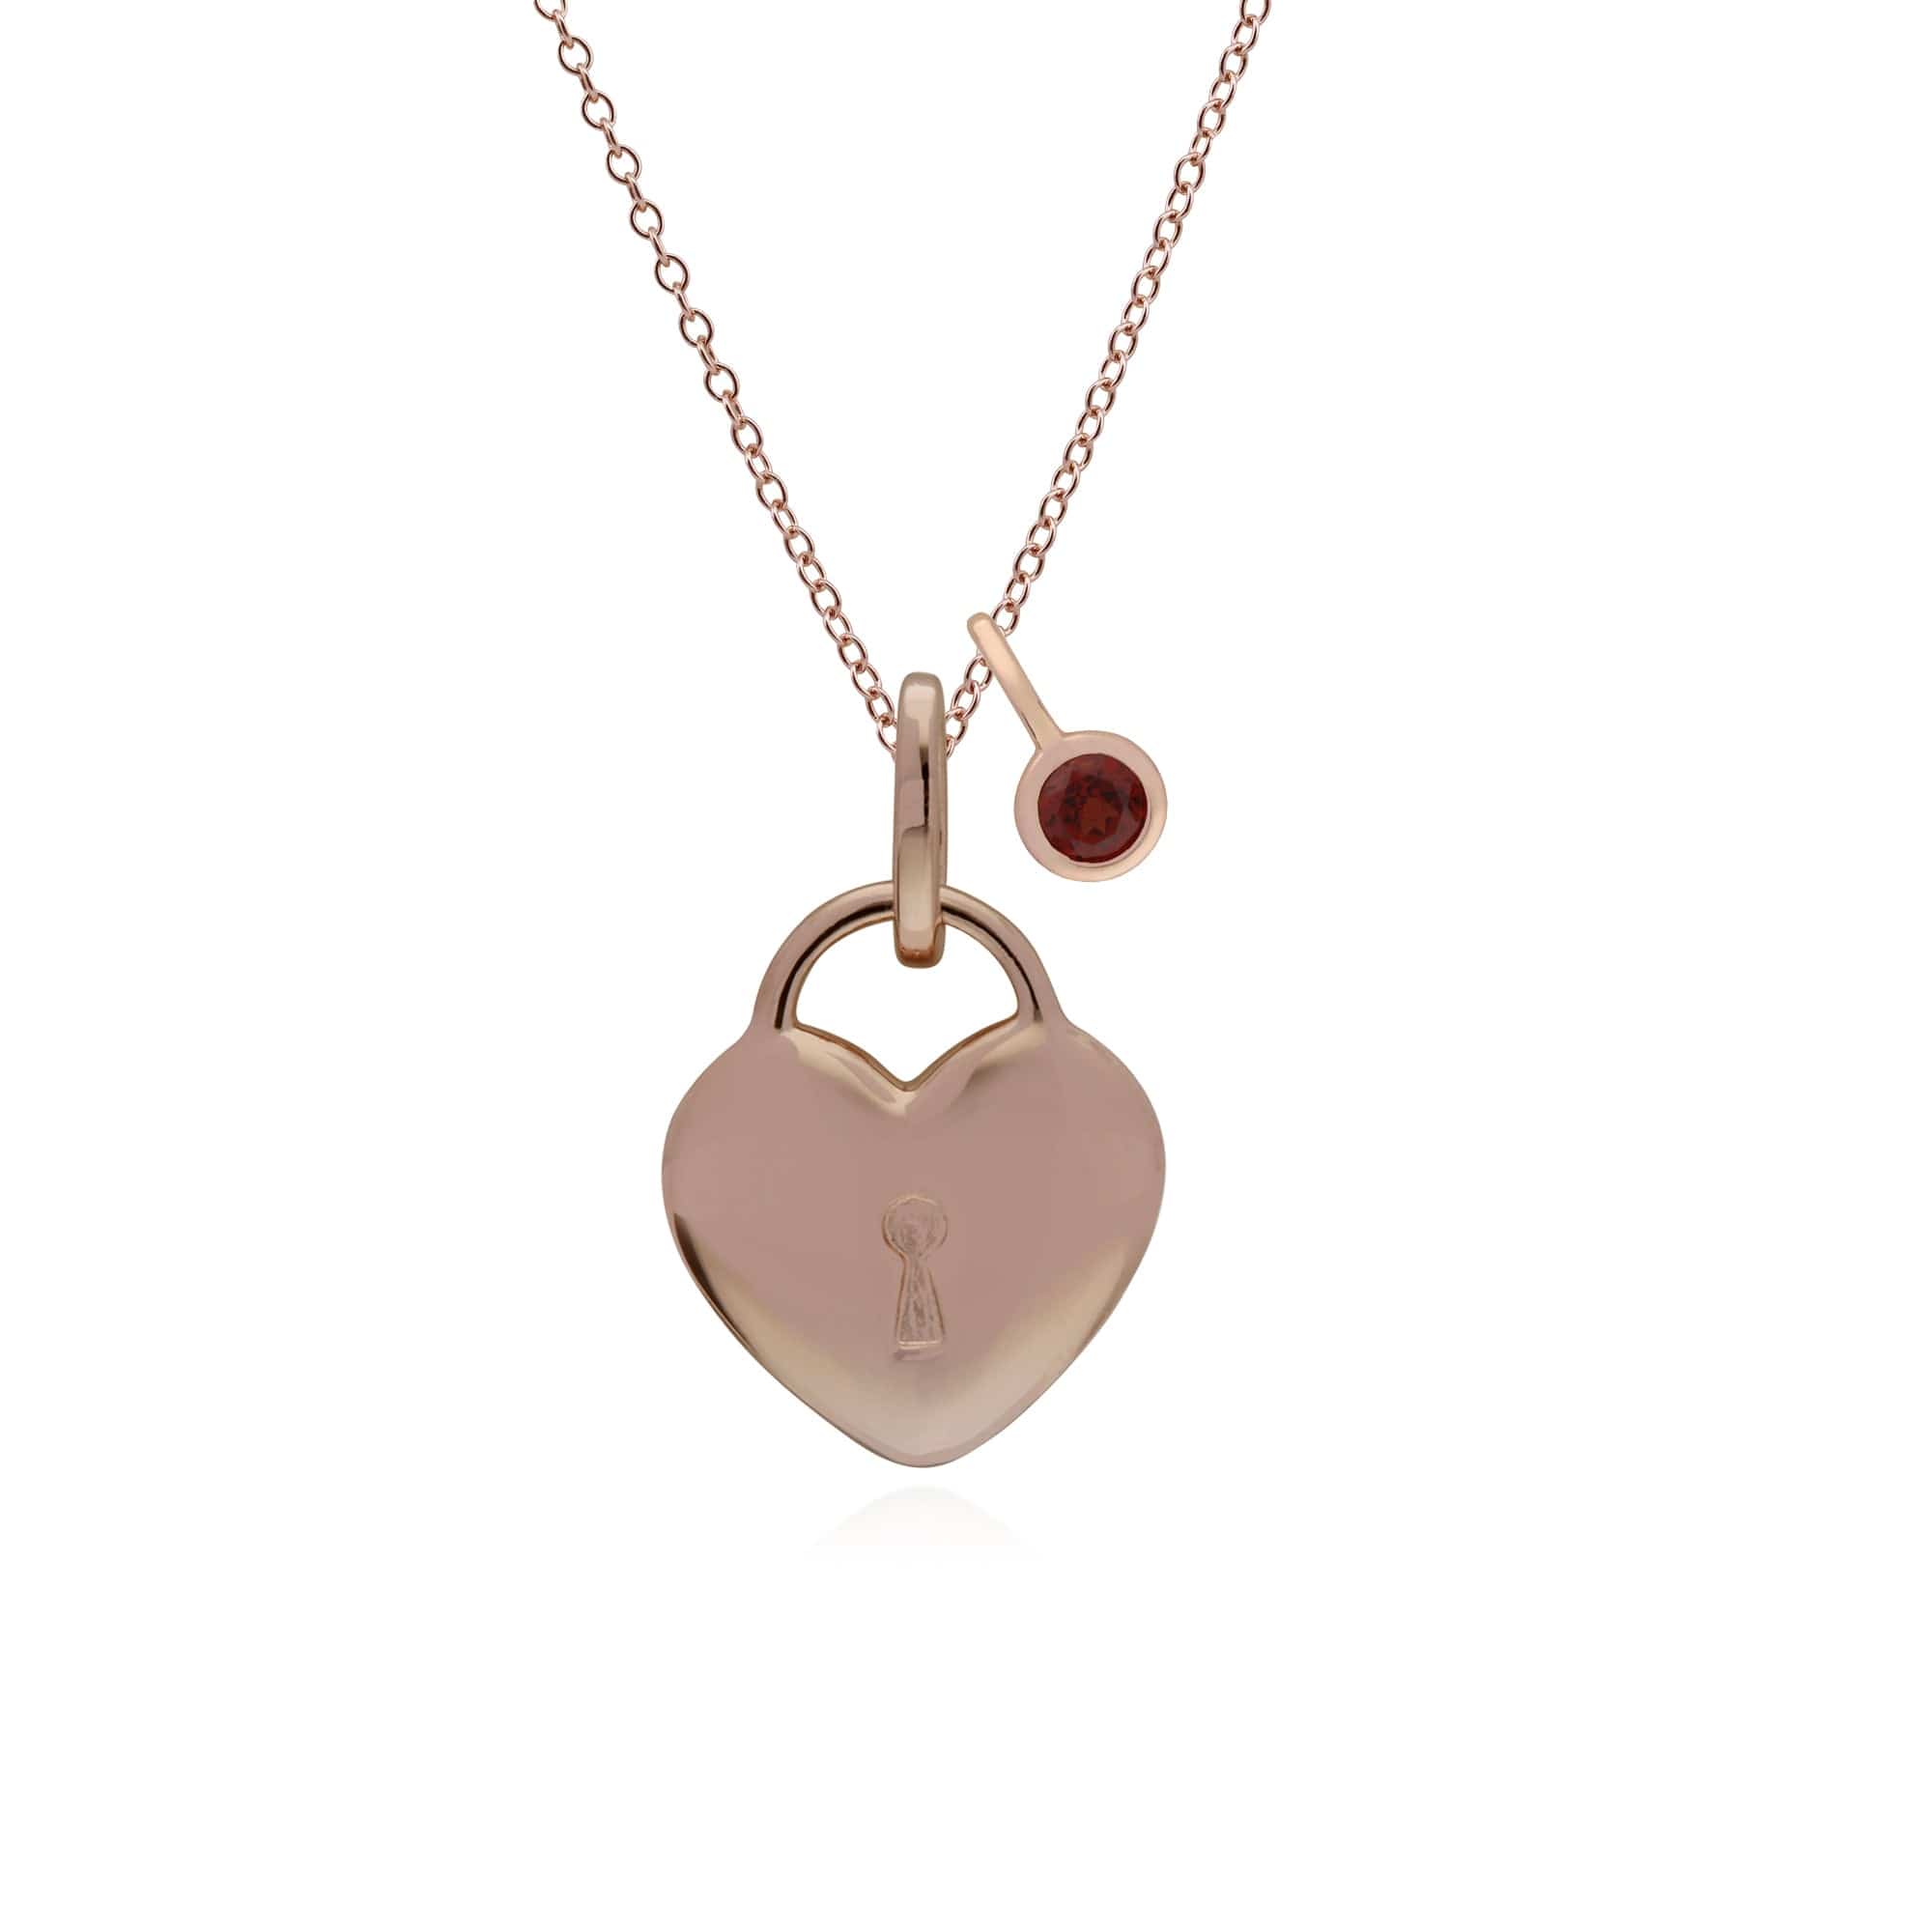 270P027304925-270P026901925 Classic Heart Lock Pendant & Garnet Charm in Rose Gold Plated 925 Sterling Silver 1